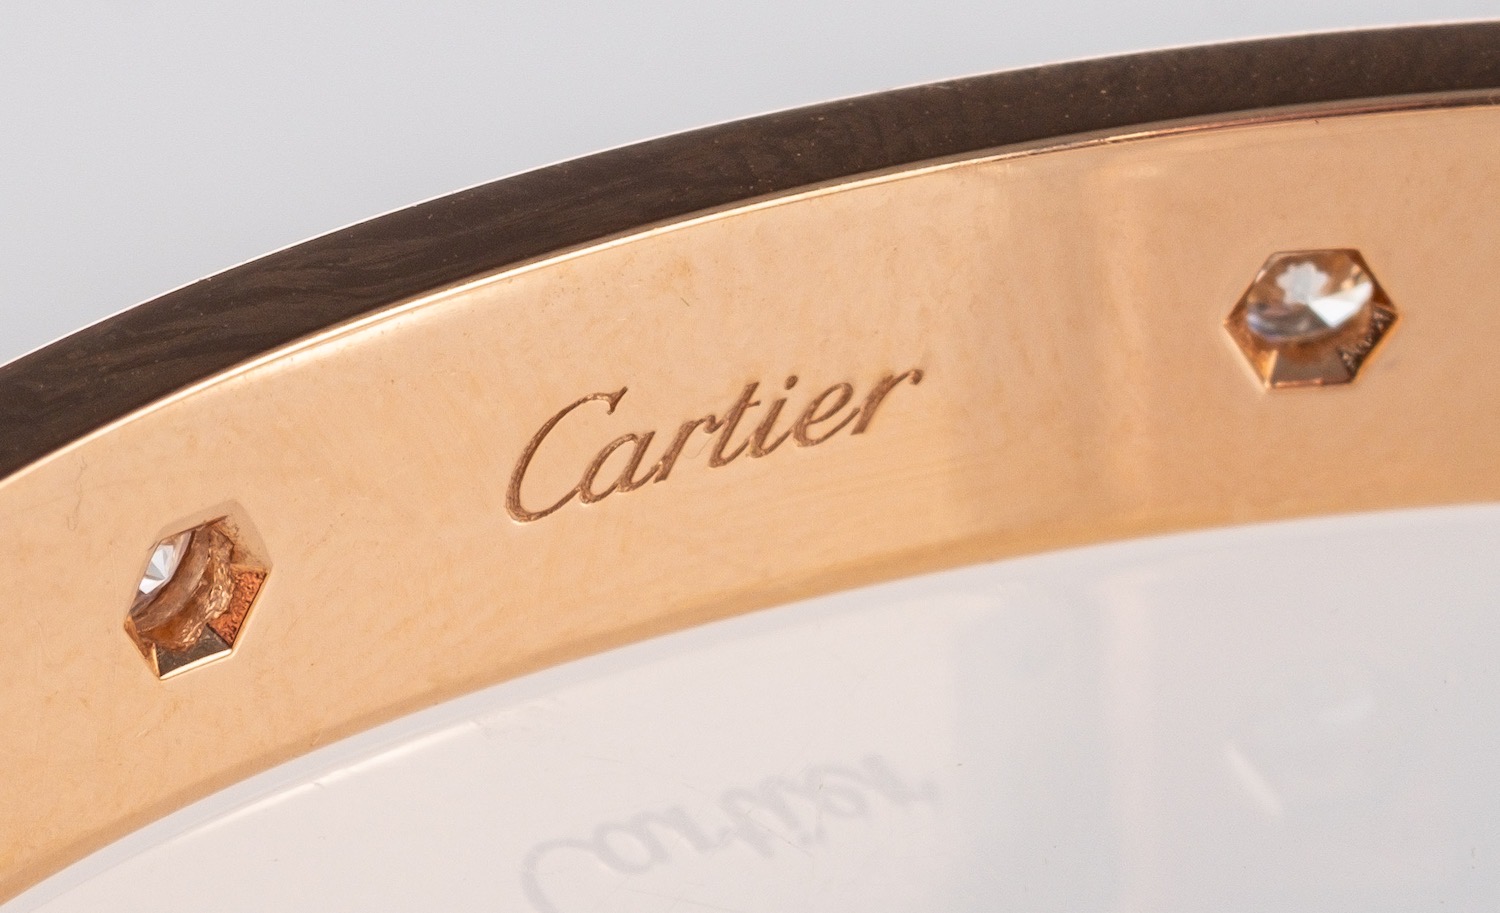 Cartier. - Image 4 of 4